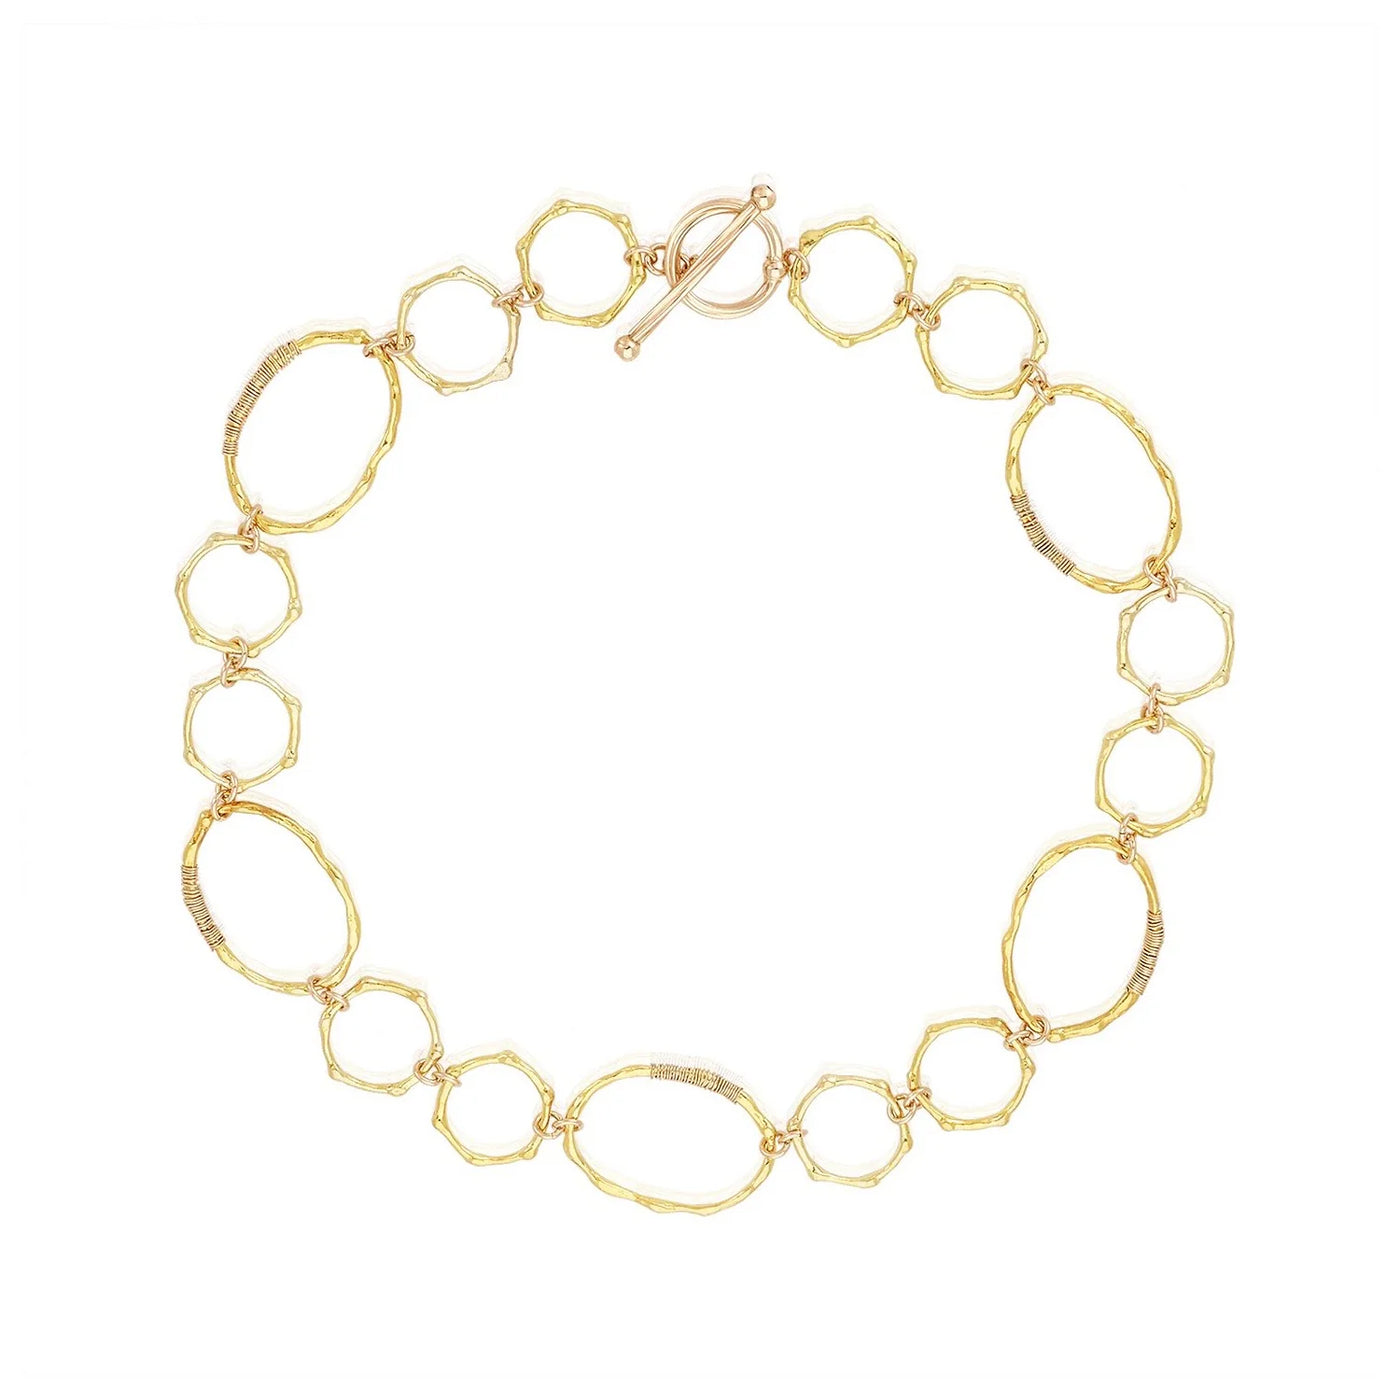 MABEL CHONG NECKLACE BAMBOO GOLD-PLATED